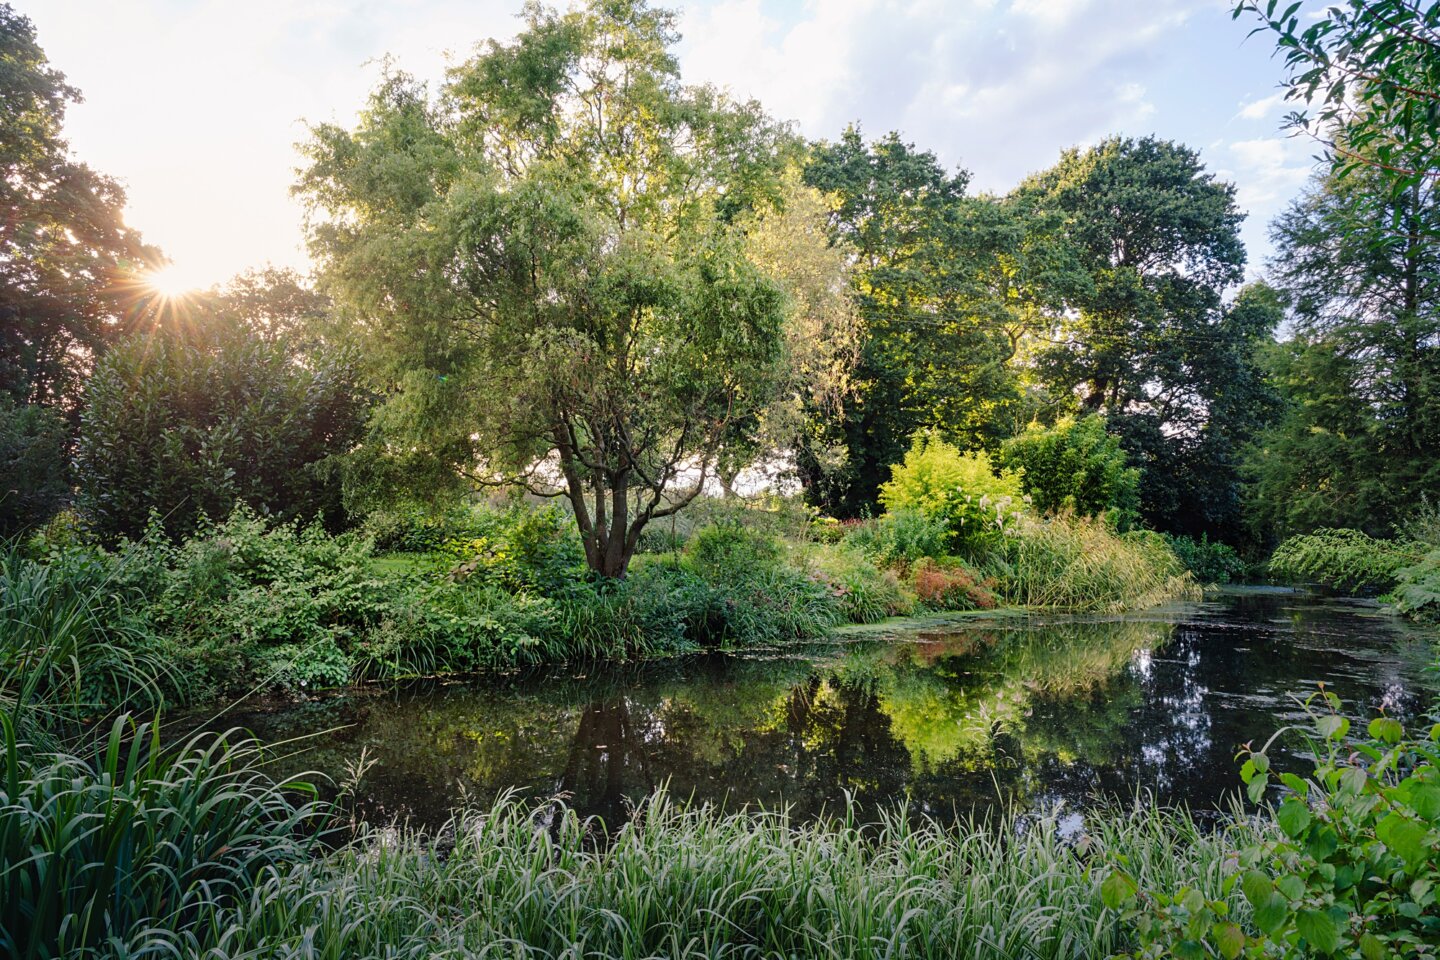 The first of a series of ponds in the Water Gardens, Beth Chatto